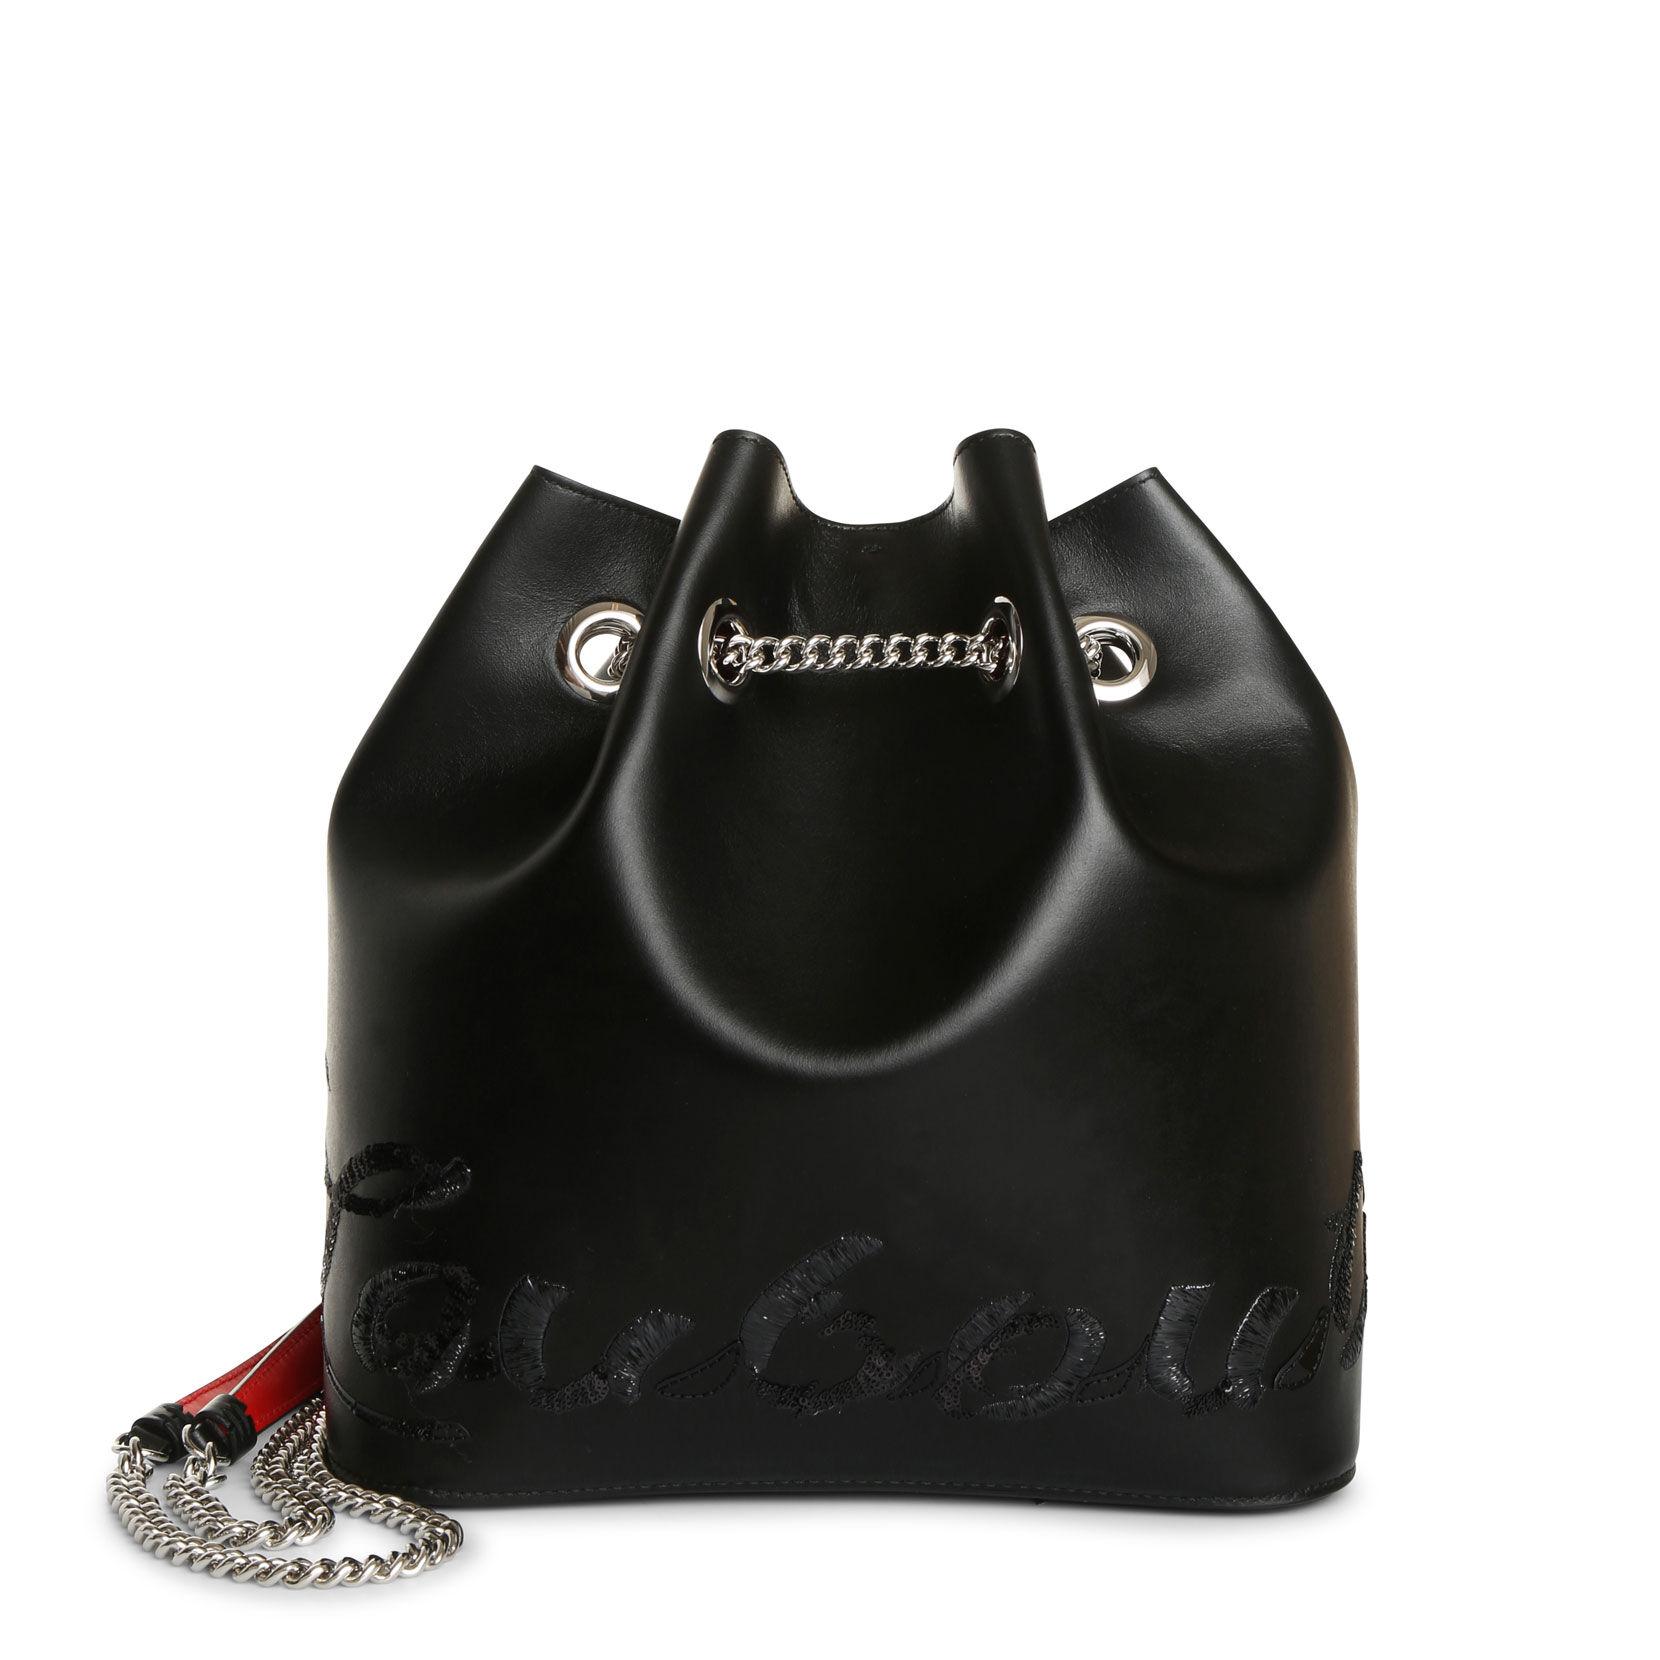 Christian Louboutin Marie Jane Backpack Leather Bag in Black - Lyst